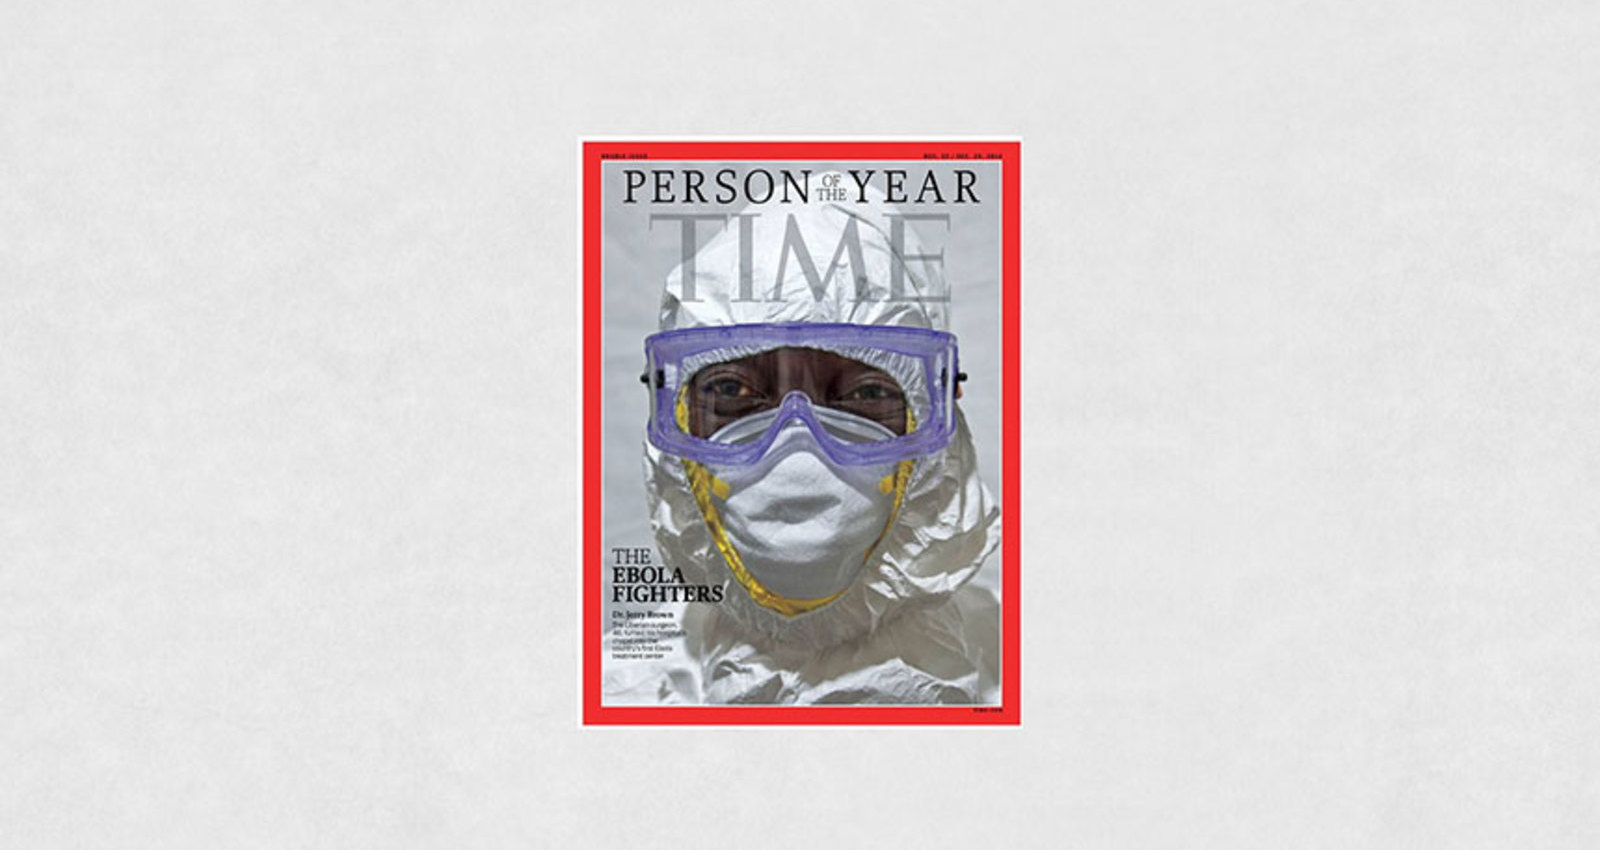 Getting Ebola Fighters on the Cover of Time